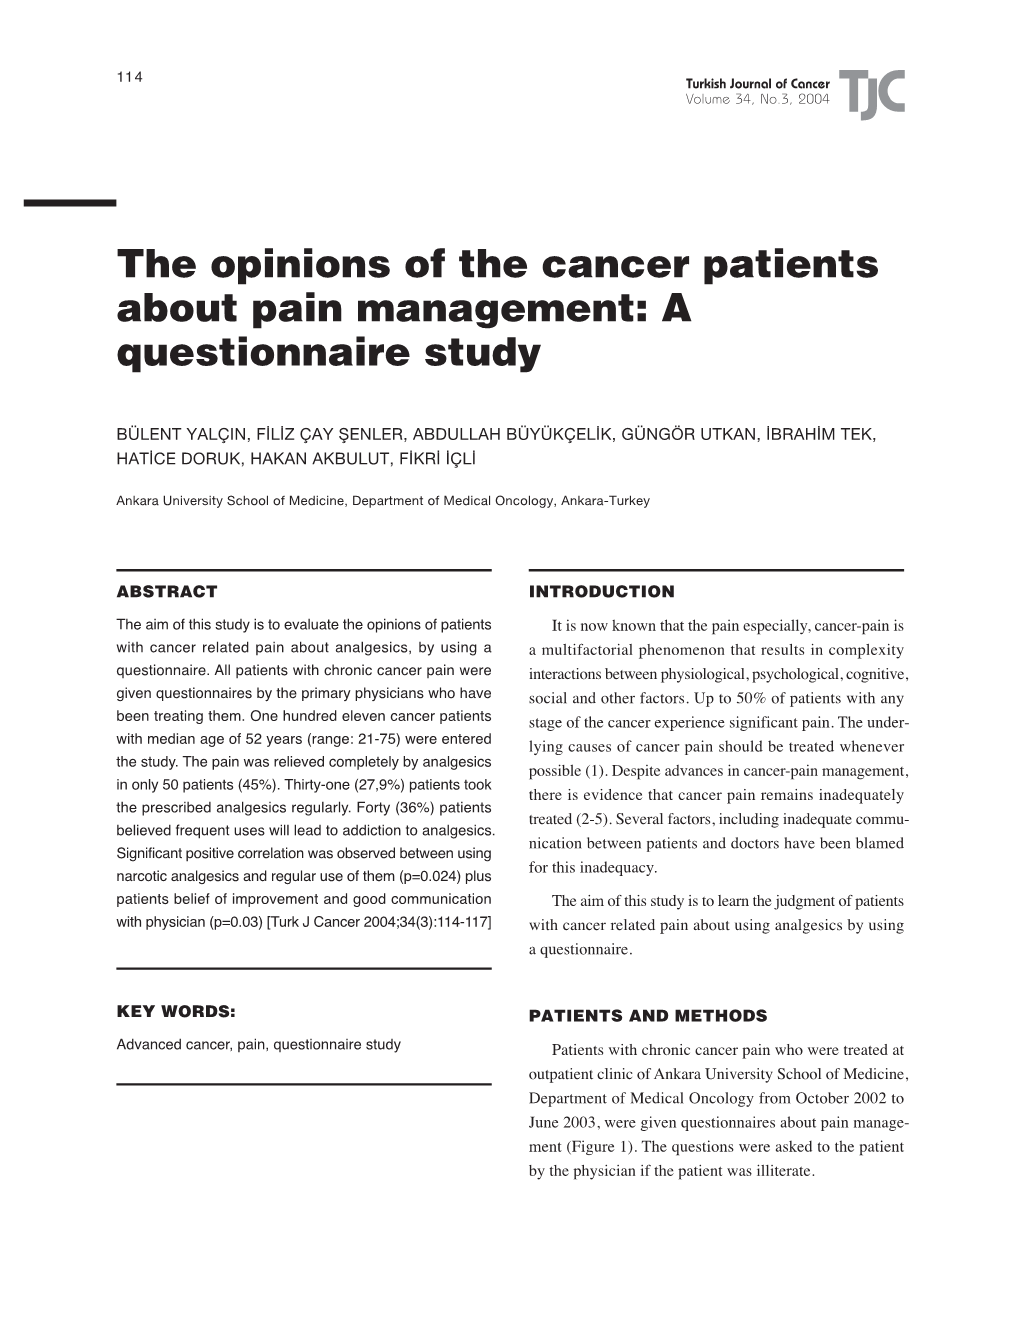 The Opinions of the Cancer Patients About Pain Management: a Questionnaire Study